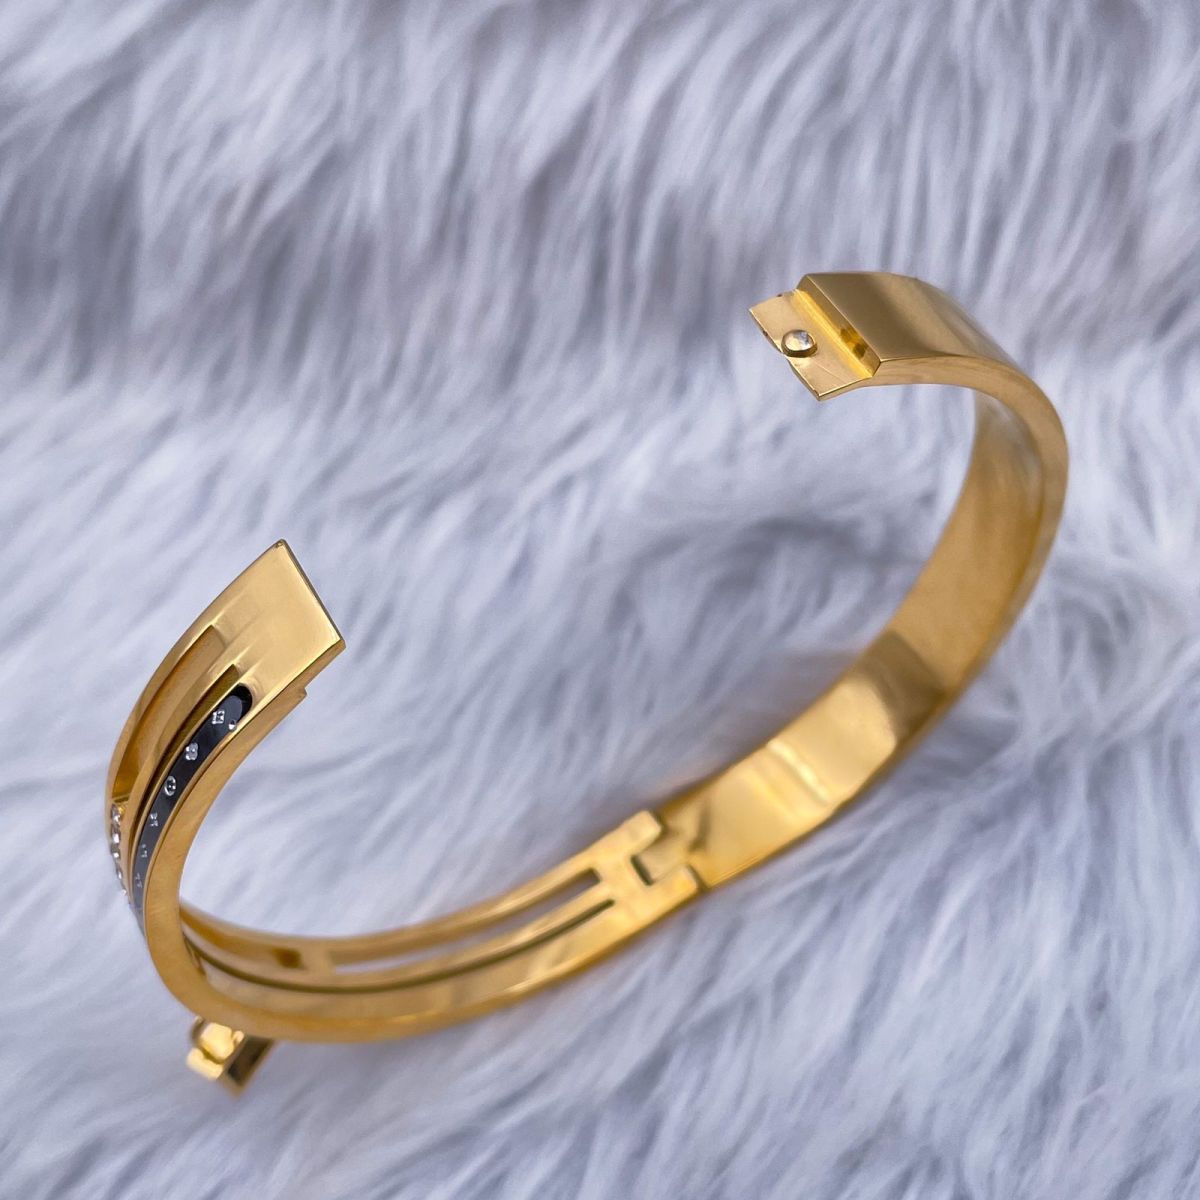 Buy quality 916 Gold Bracelet With Lock MPLKB30 in Ahmedabad